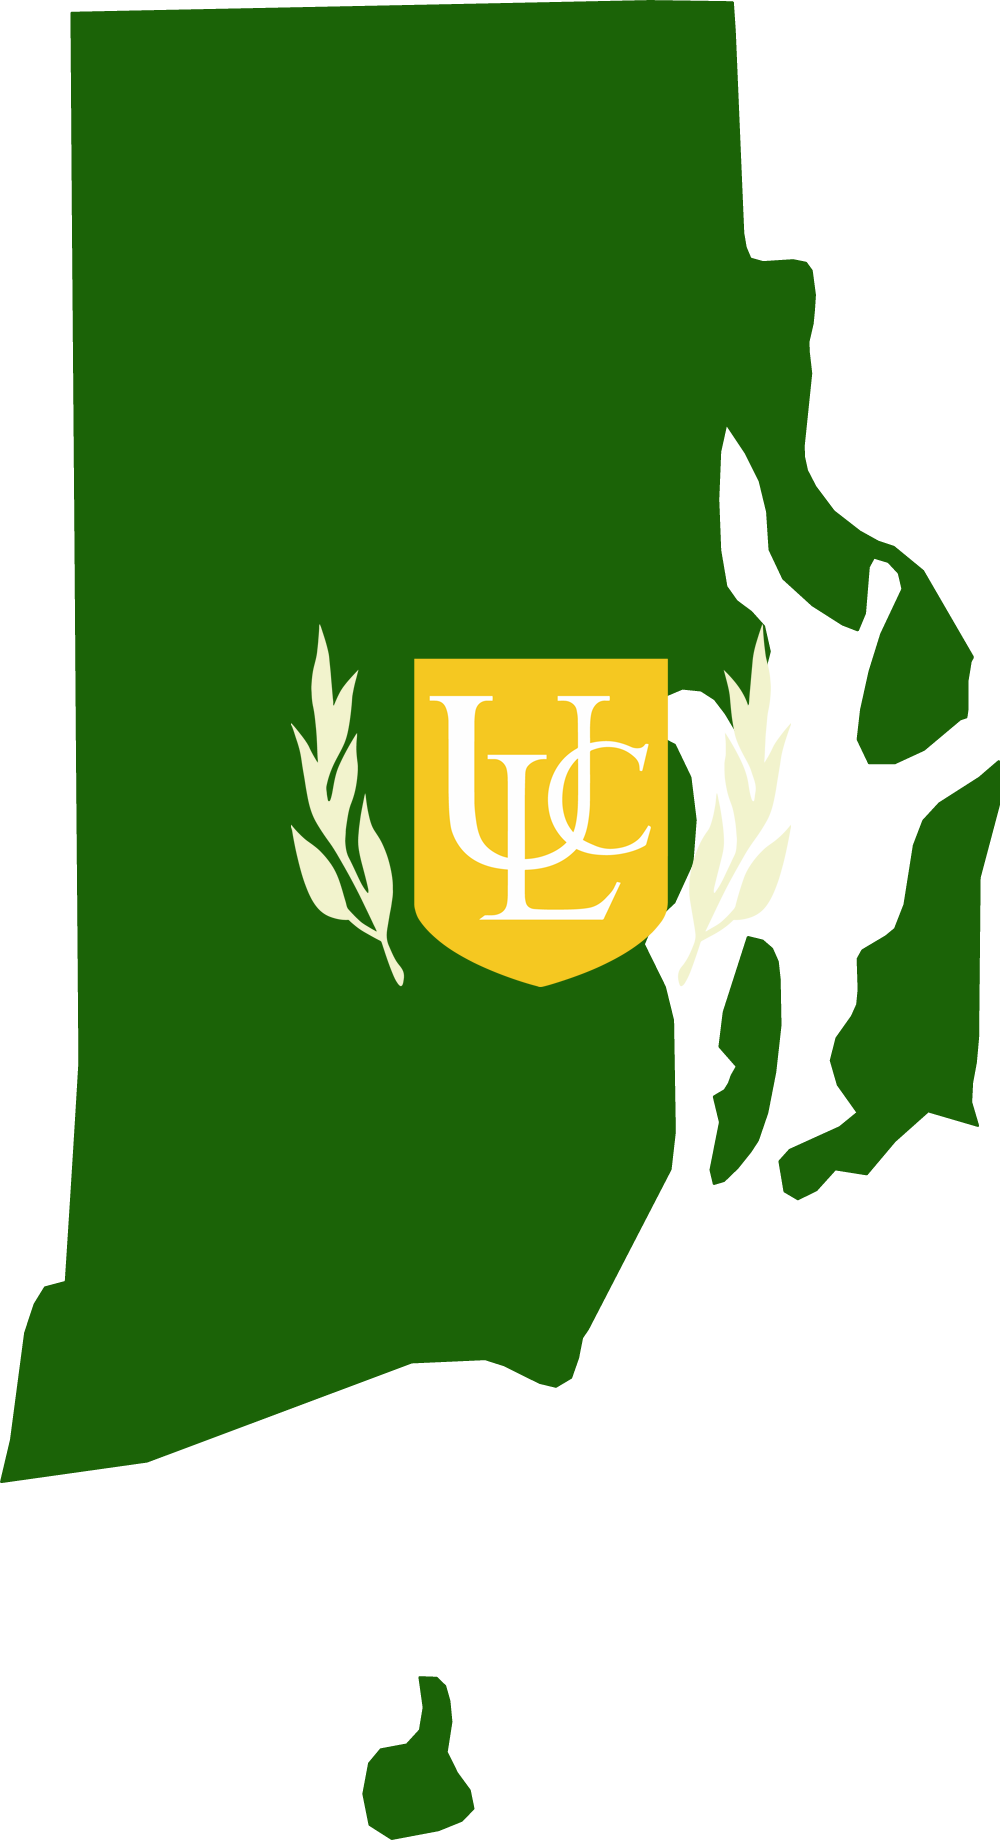 An outline of RI with the ULC logo